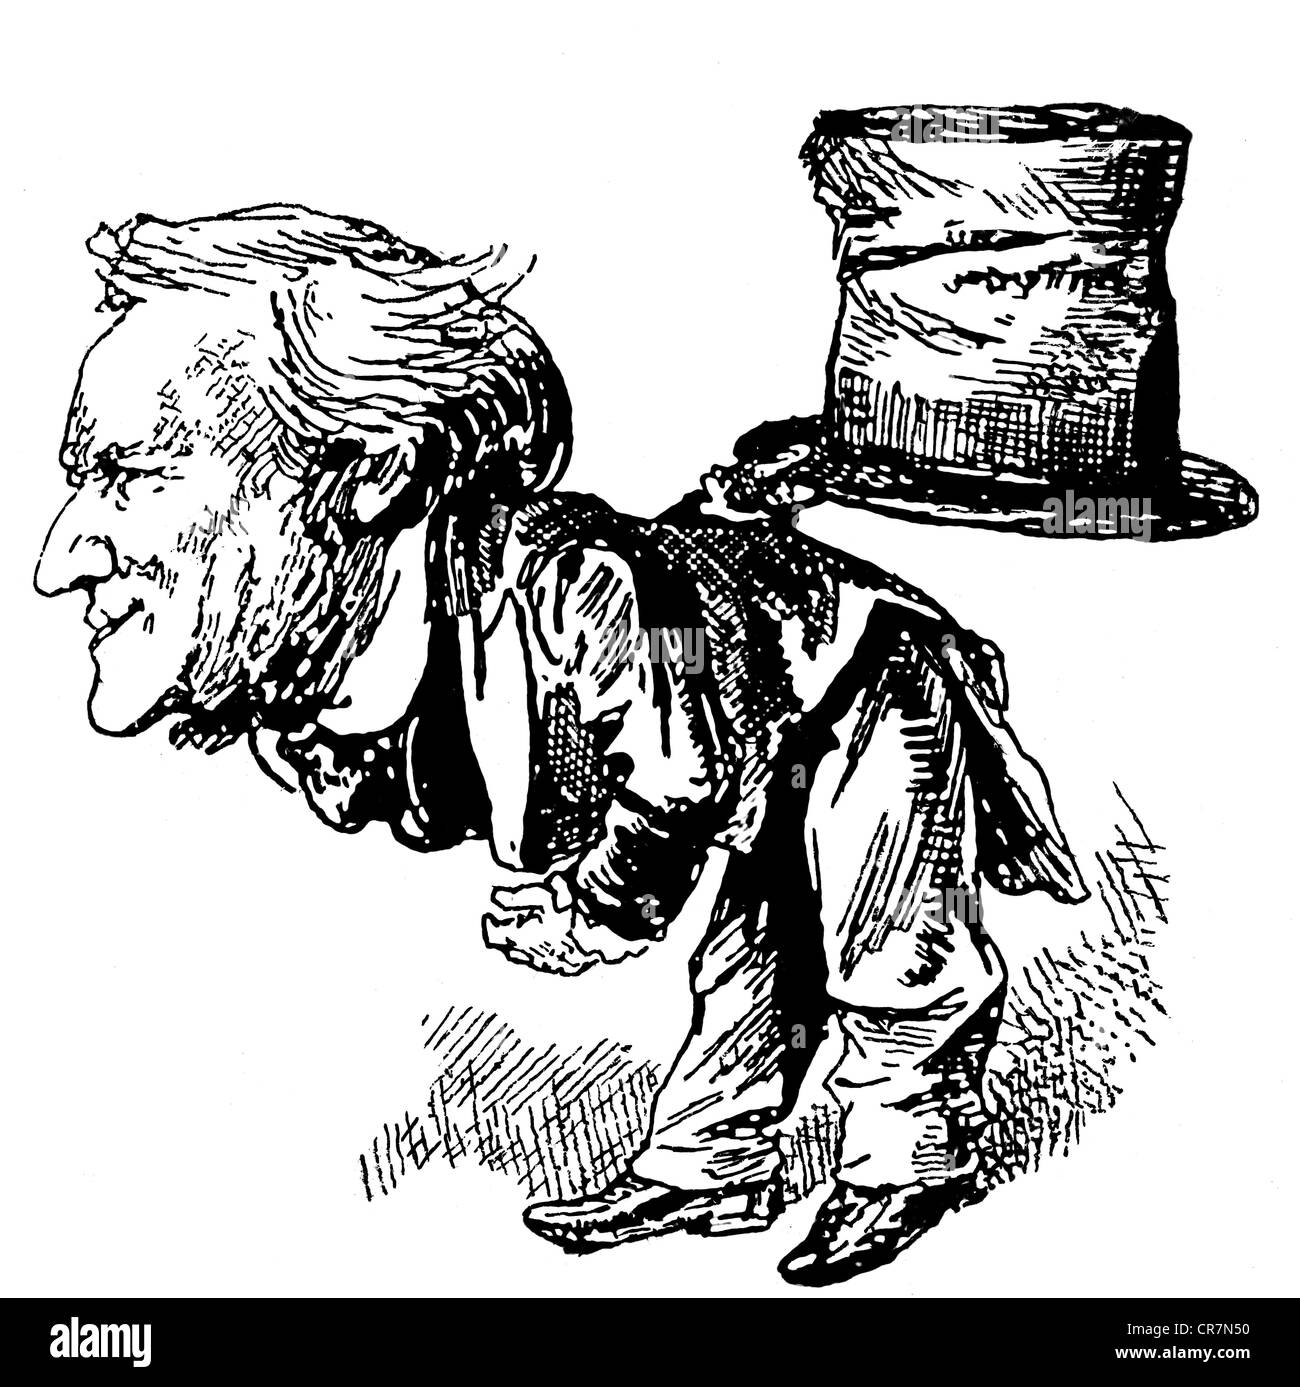 Wagner, Richard, 22.5.1813 - 13.2.1883, German composer, as concert orator, caricature, Vienna, 1870s / 1880s, Stock Photo